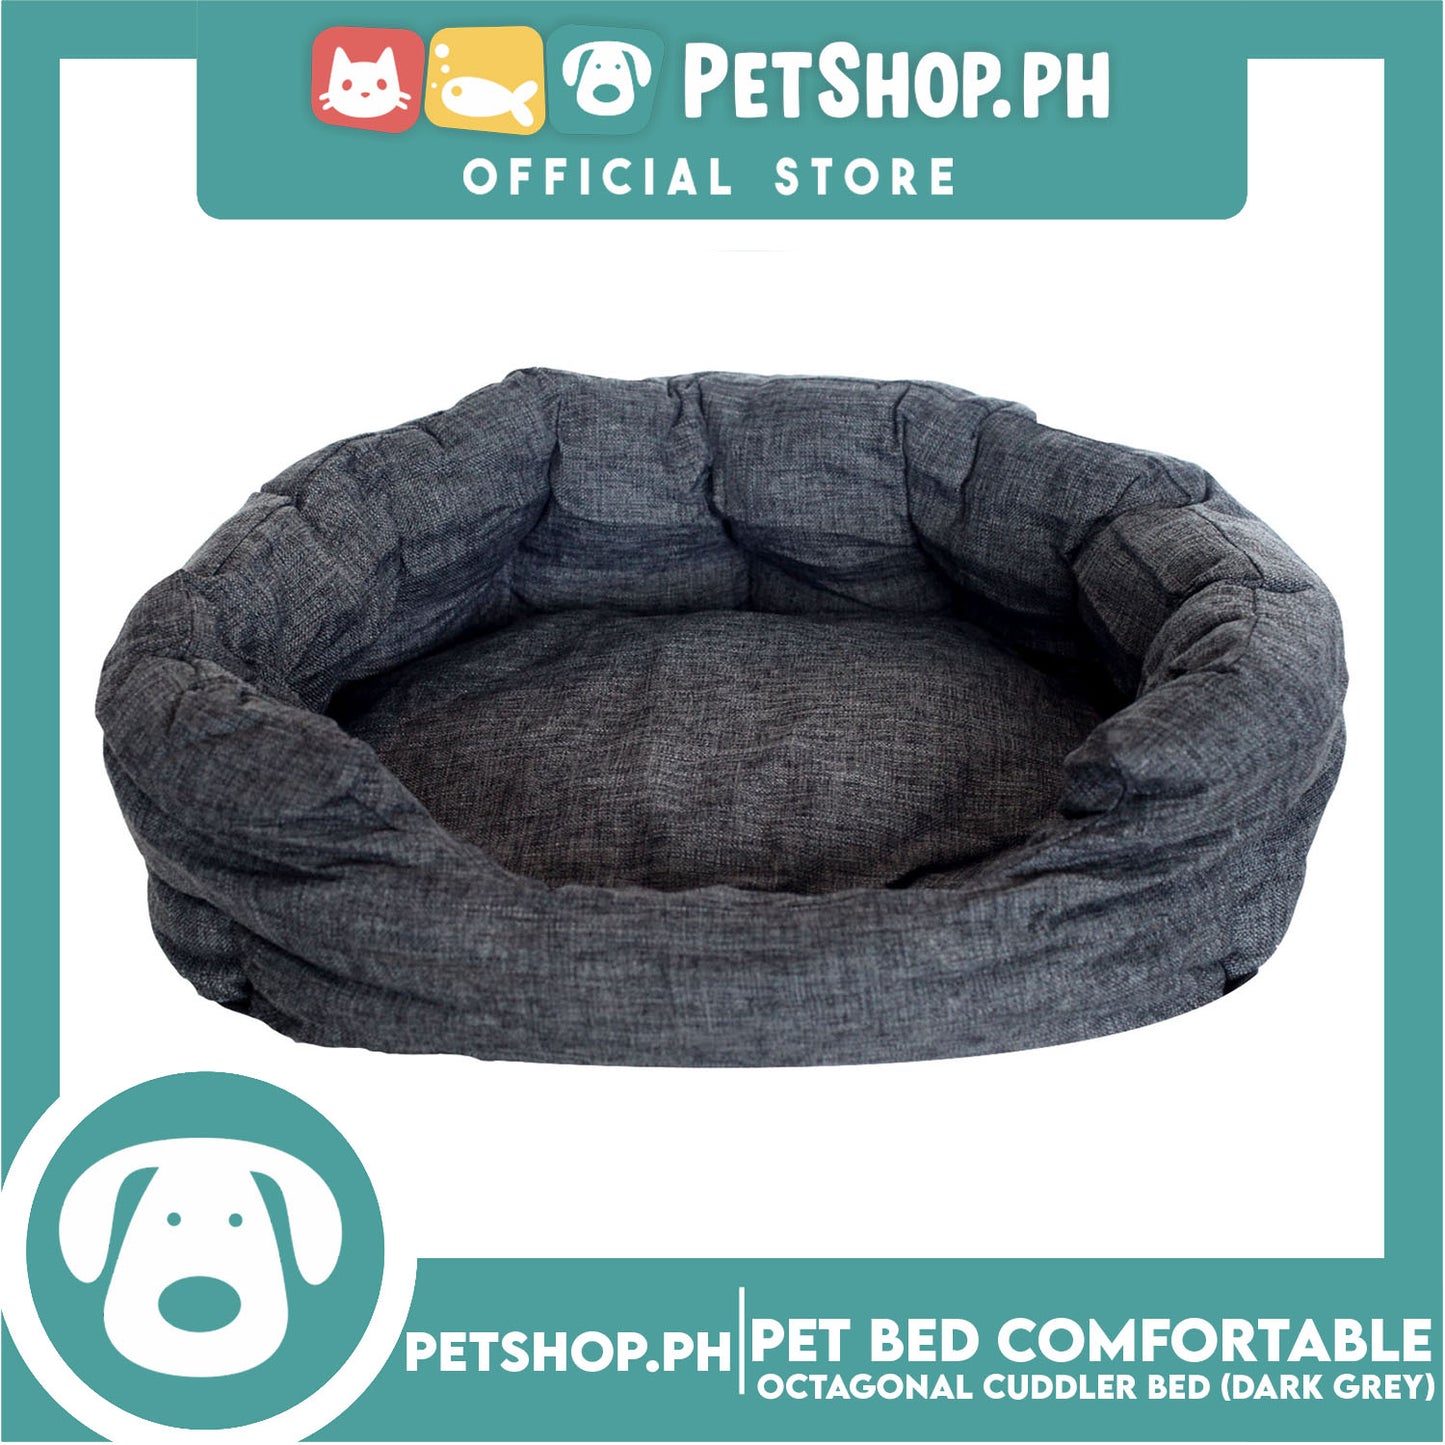 Pet Bed Comfortable Octagonal Cuddler Dog Bed 42x35x13cm Small for Dogs & Cats (Dark Gray)